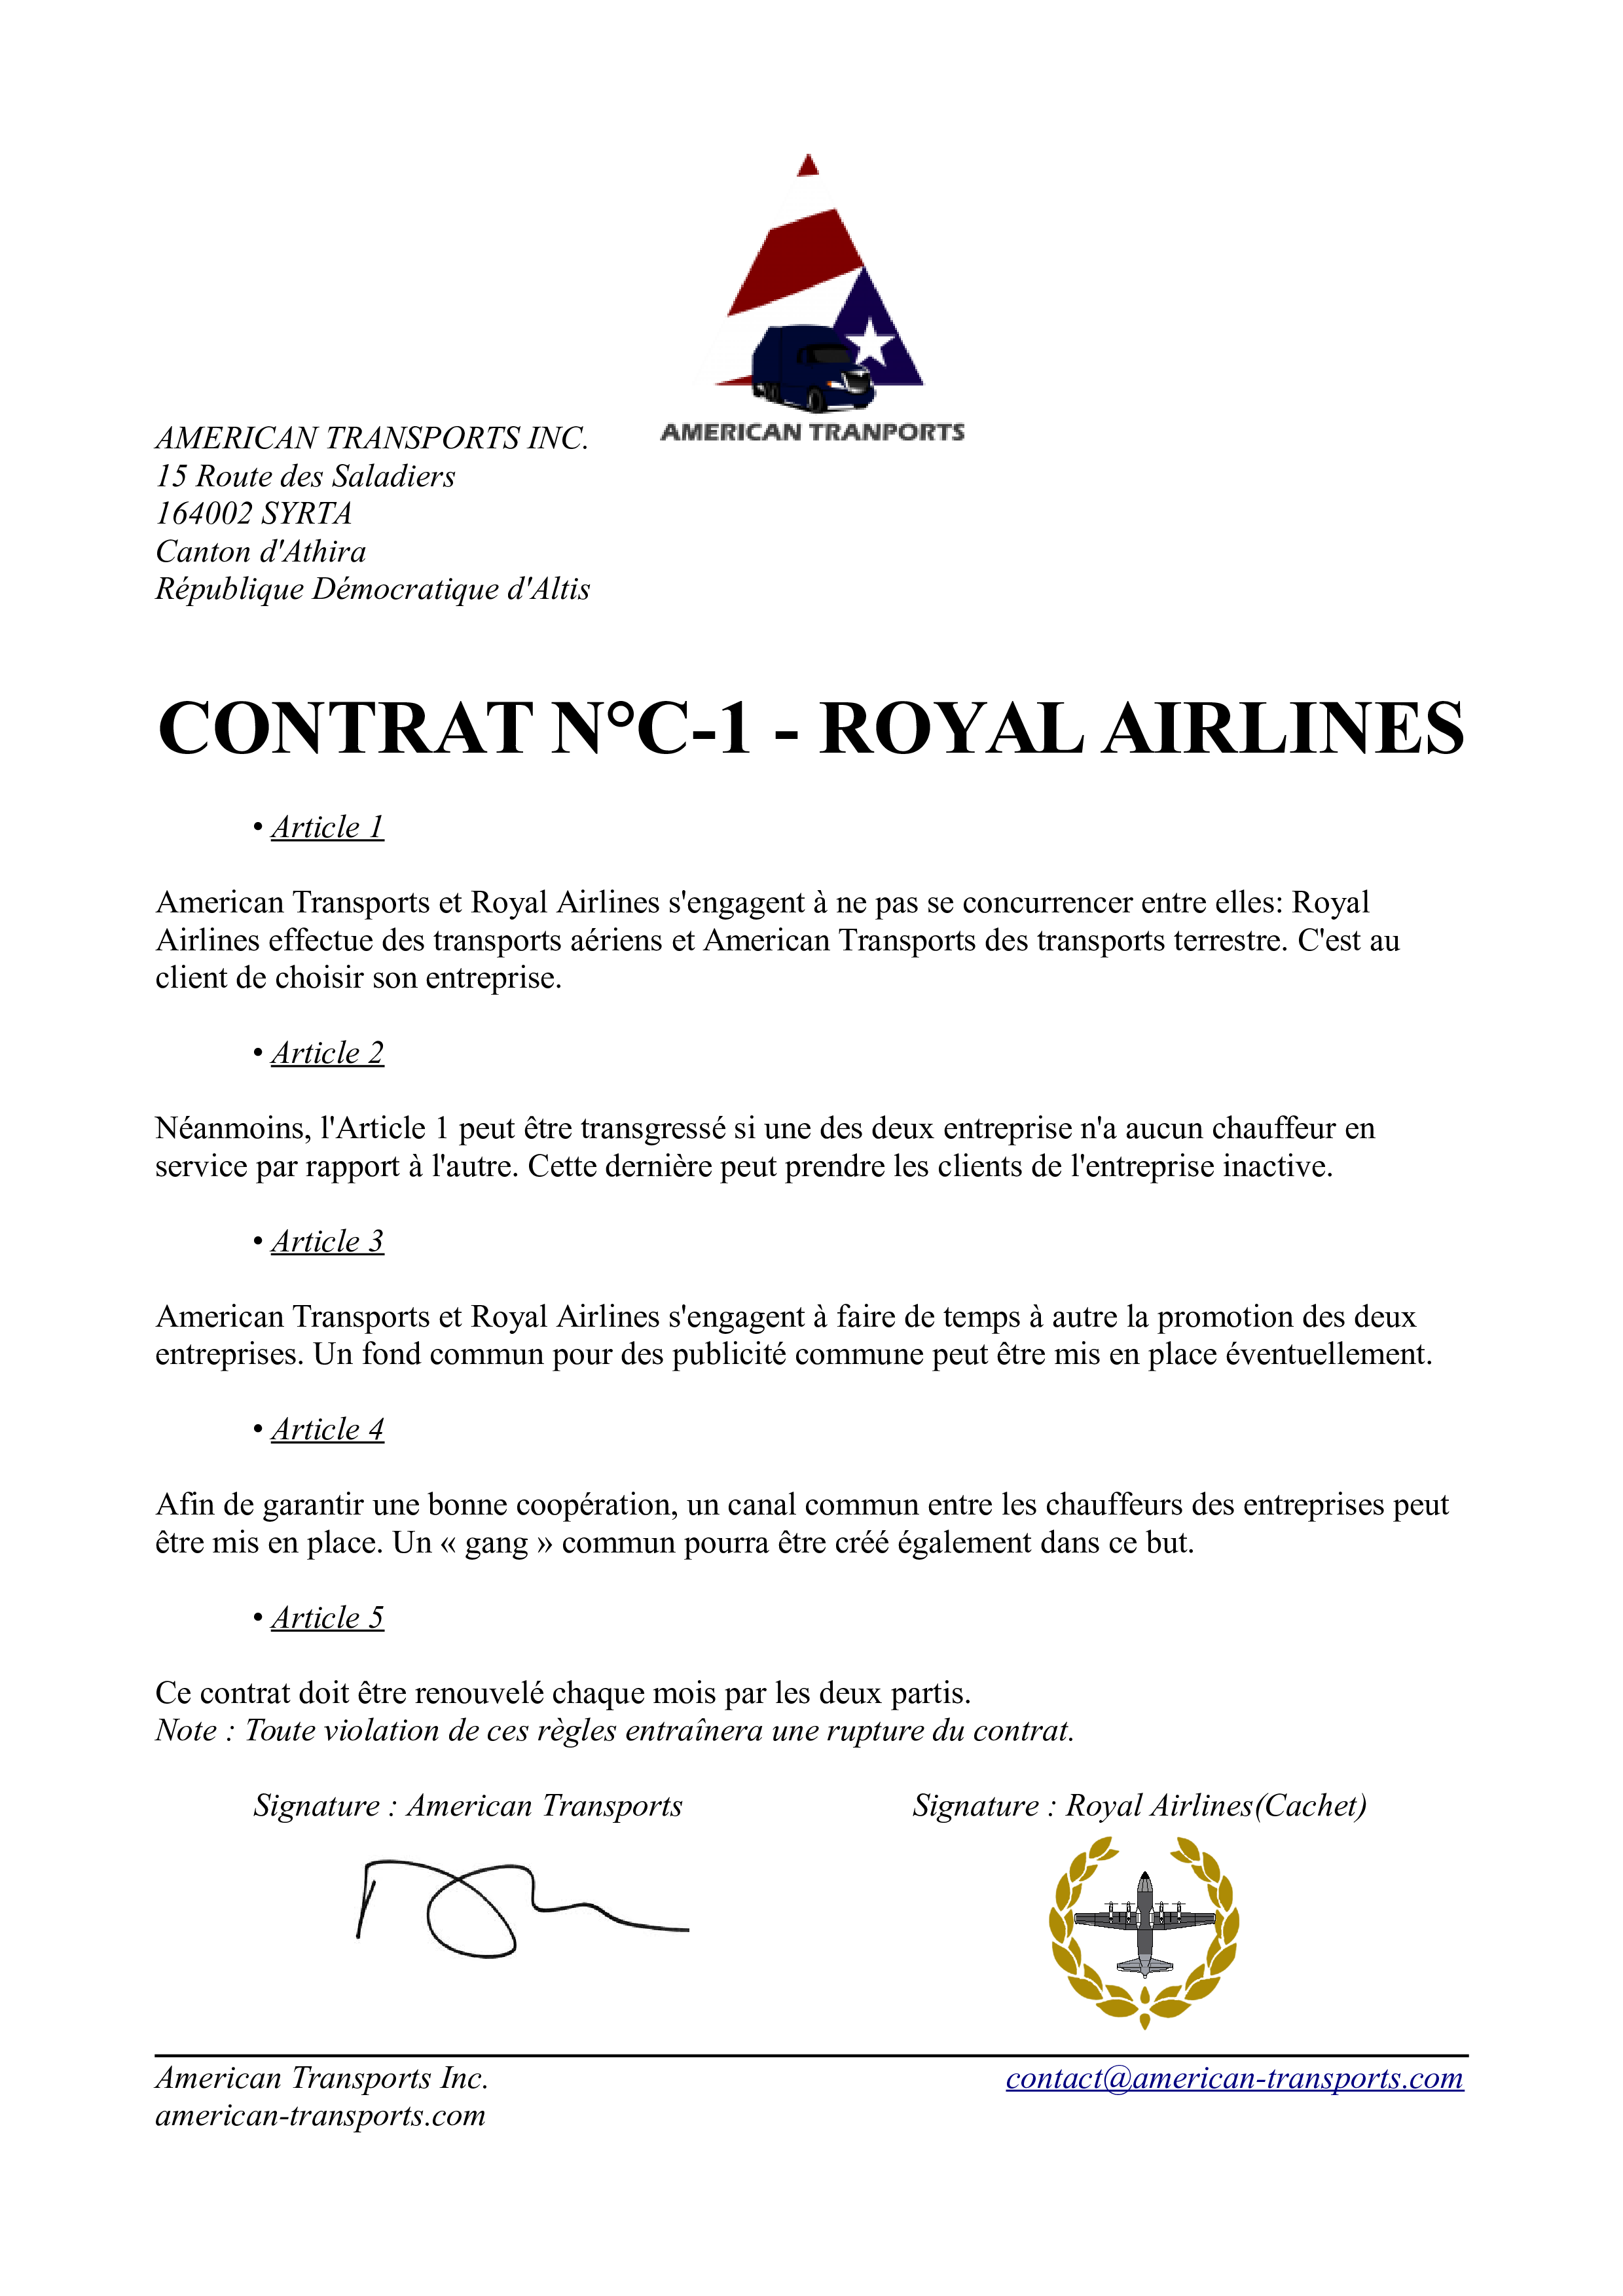 Contrat C-1, Royal Airlines.png